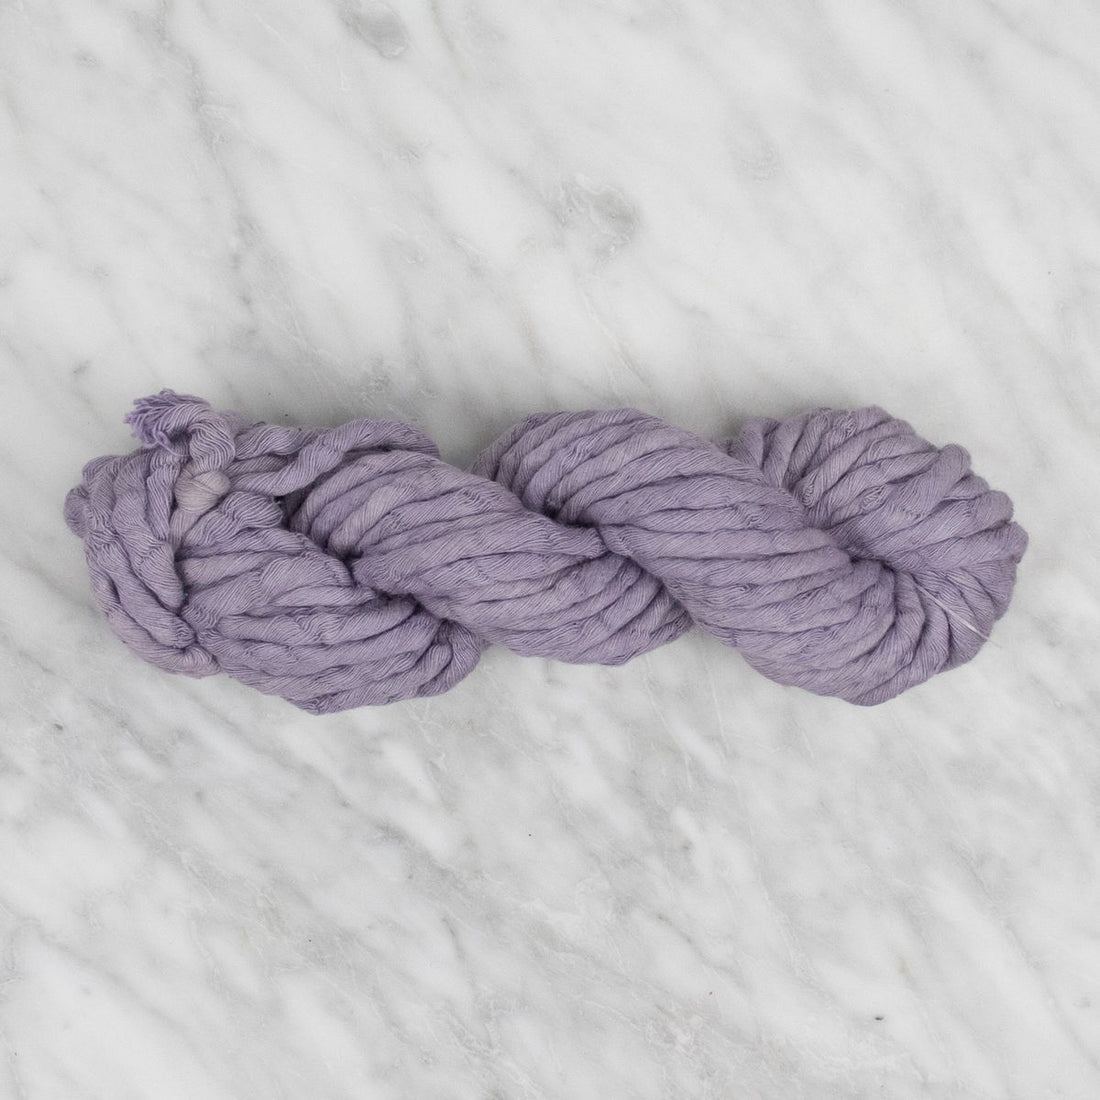 5mm Hand-Dyed Cotton String - Orchid Mist - 100 grams